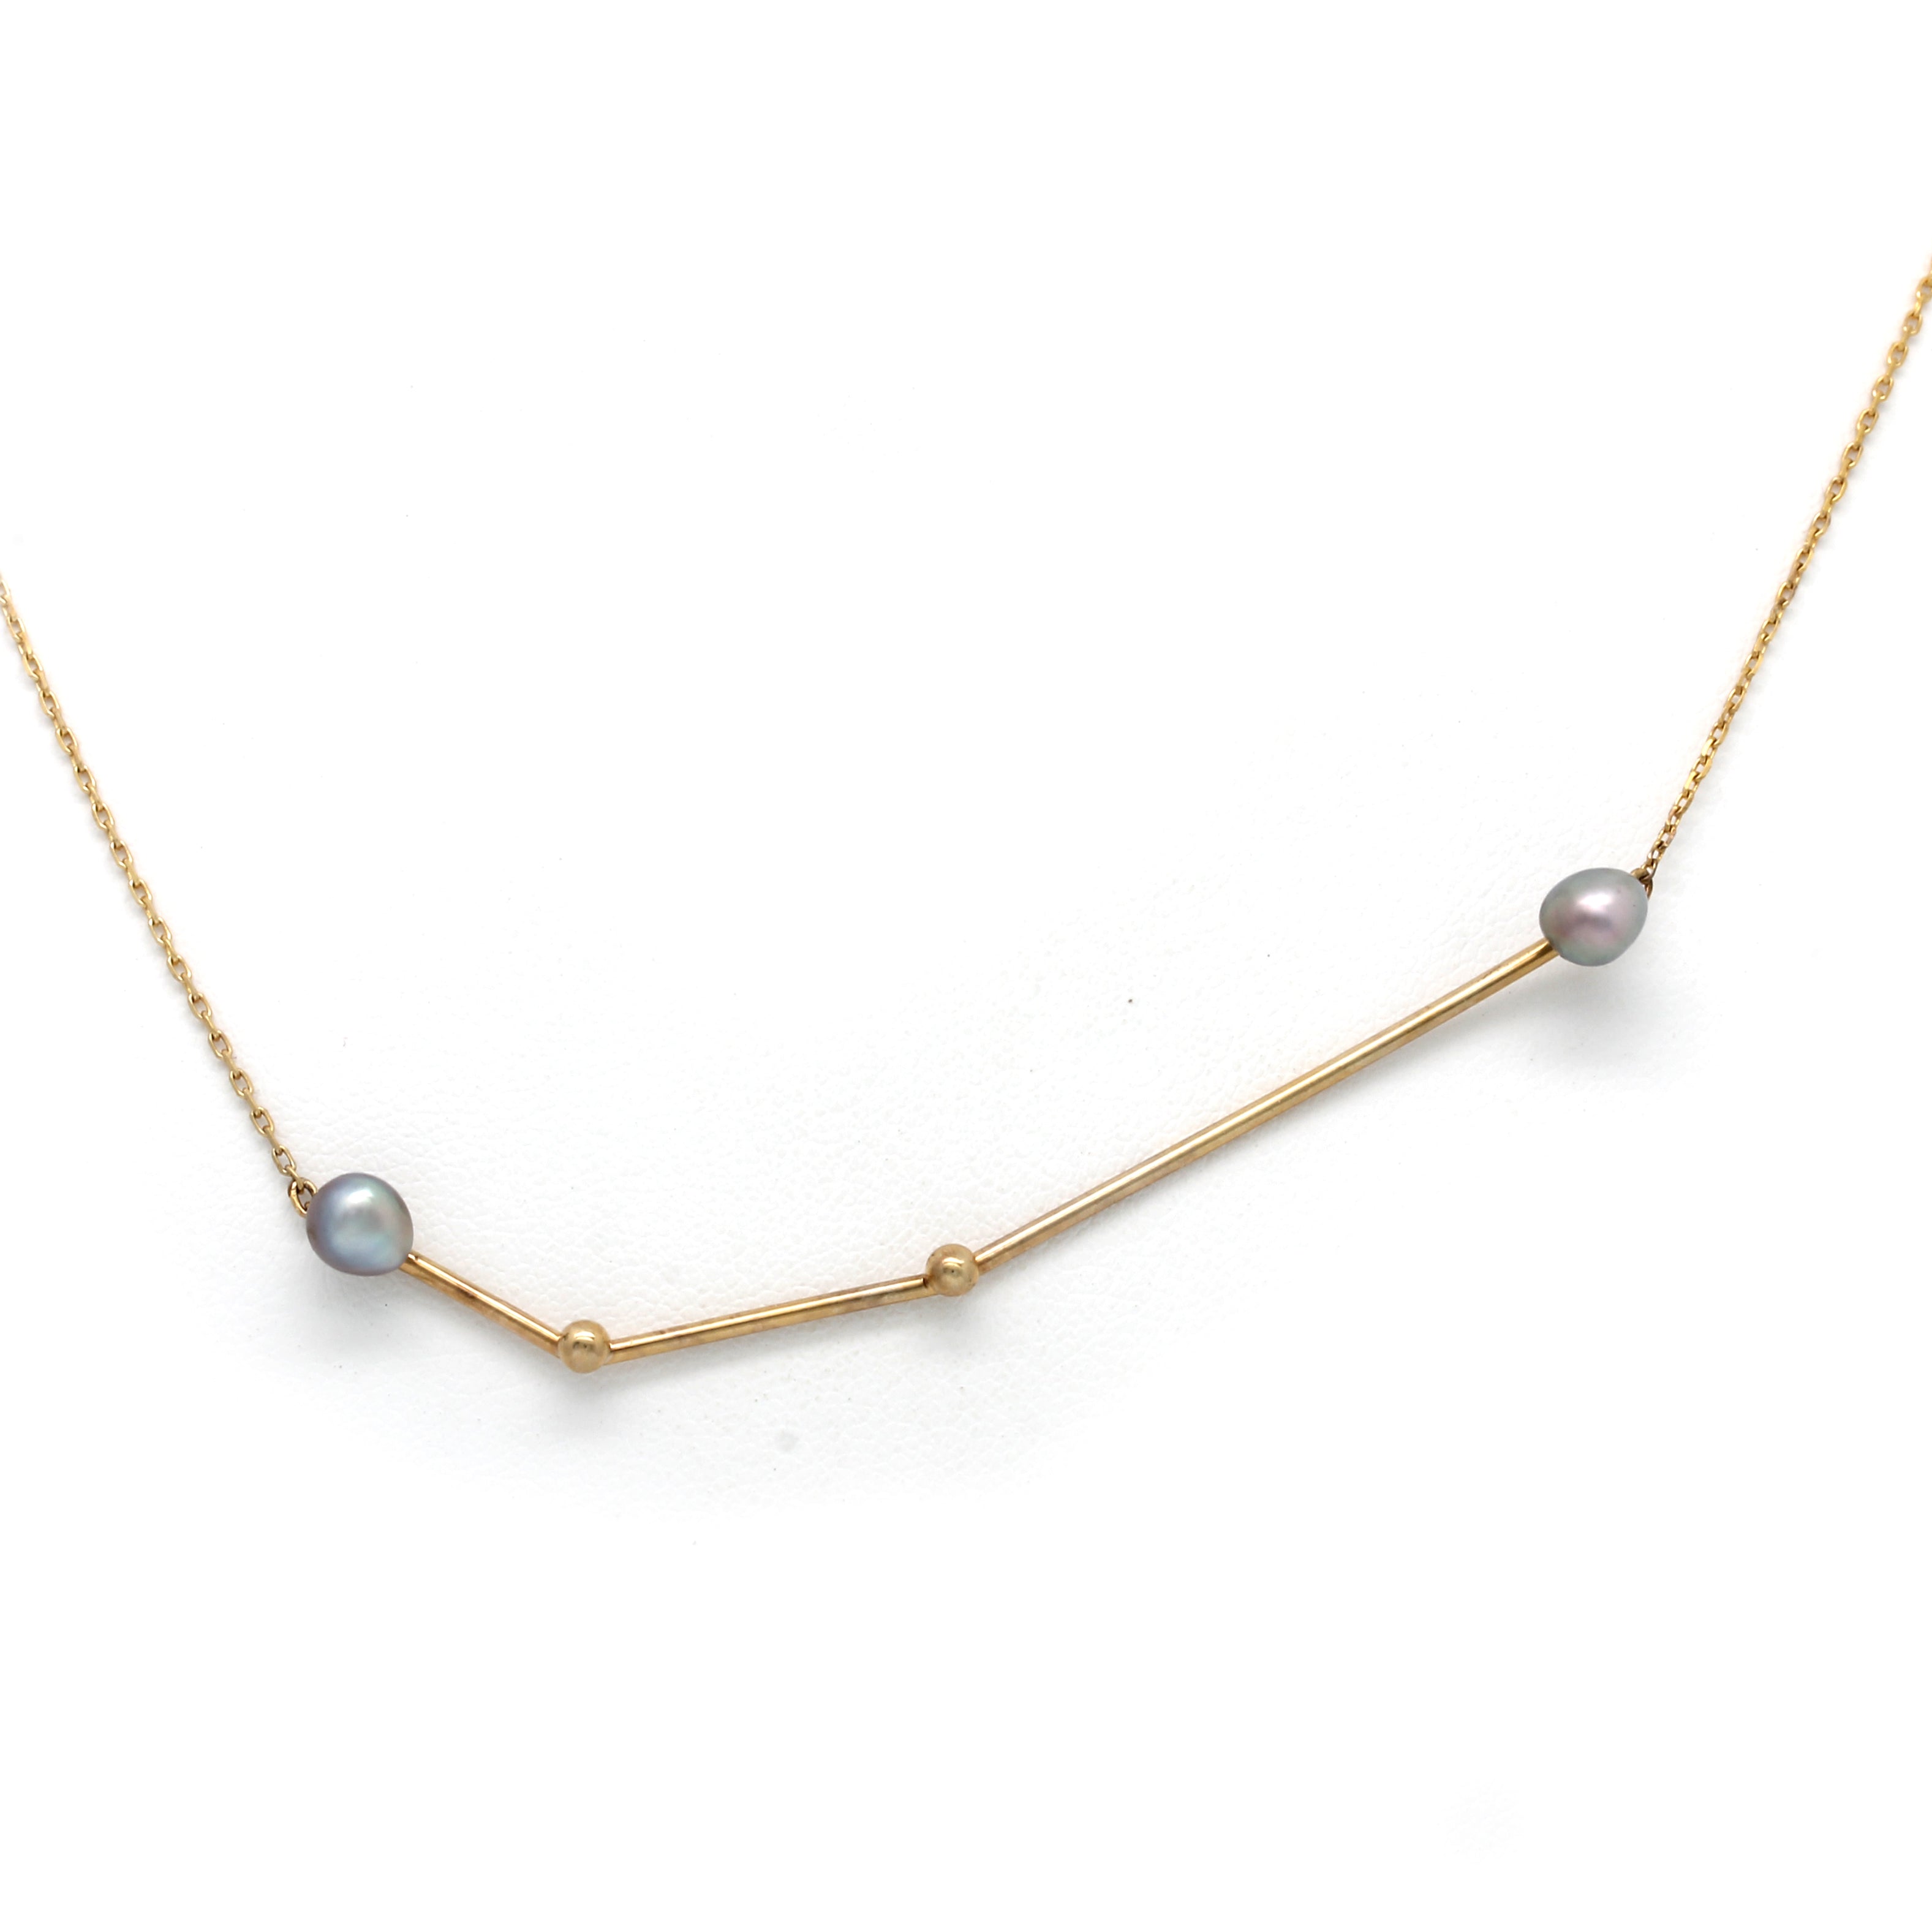 "Aries (Mar 21th - April 19th)" 14K Yellow Gold Pendant and Chain with Cortez Keshi Pearls